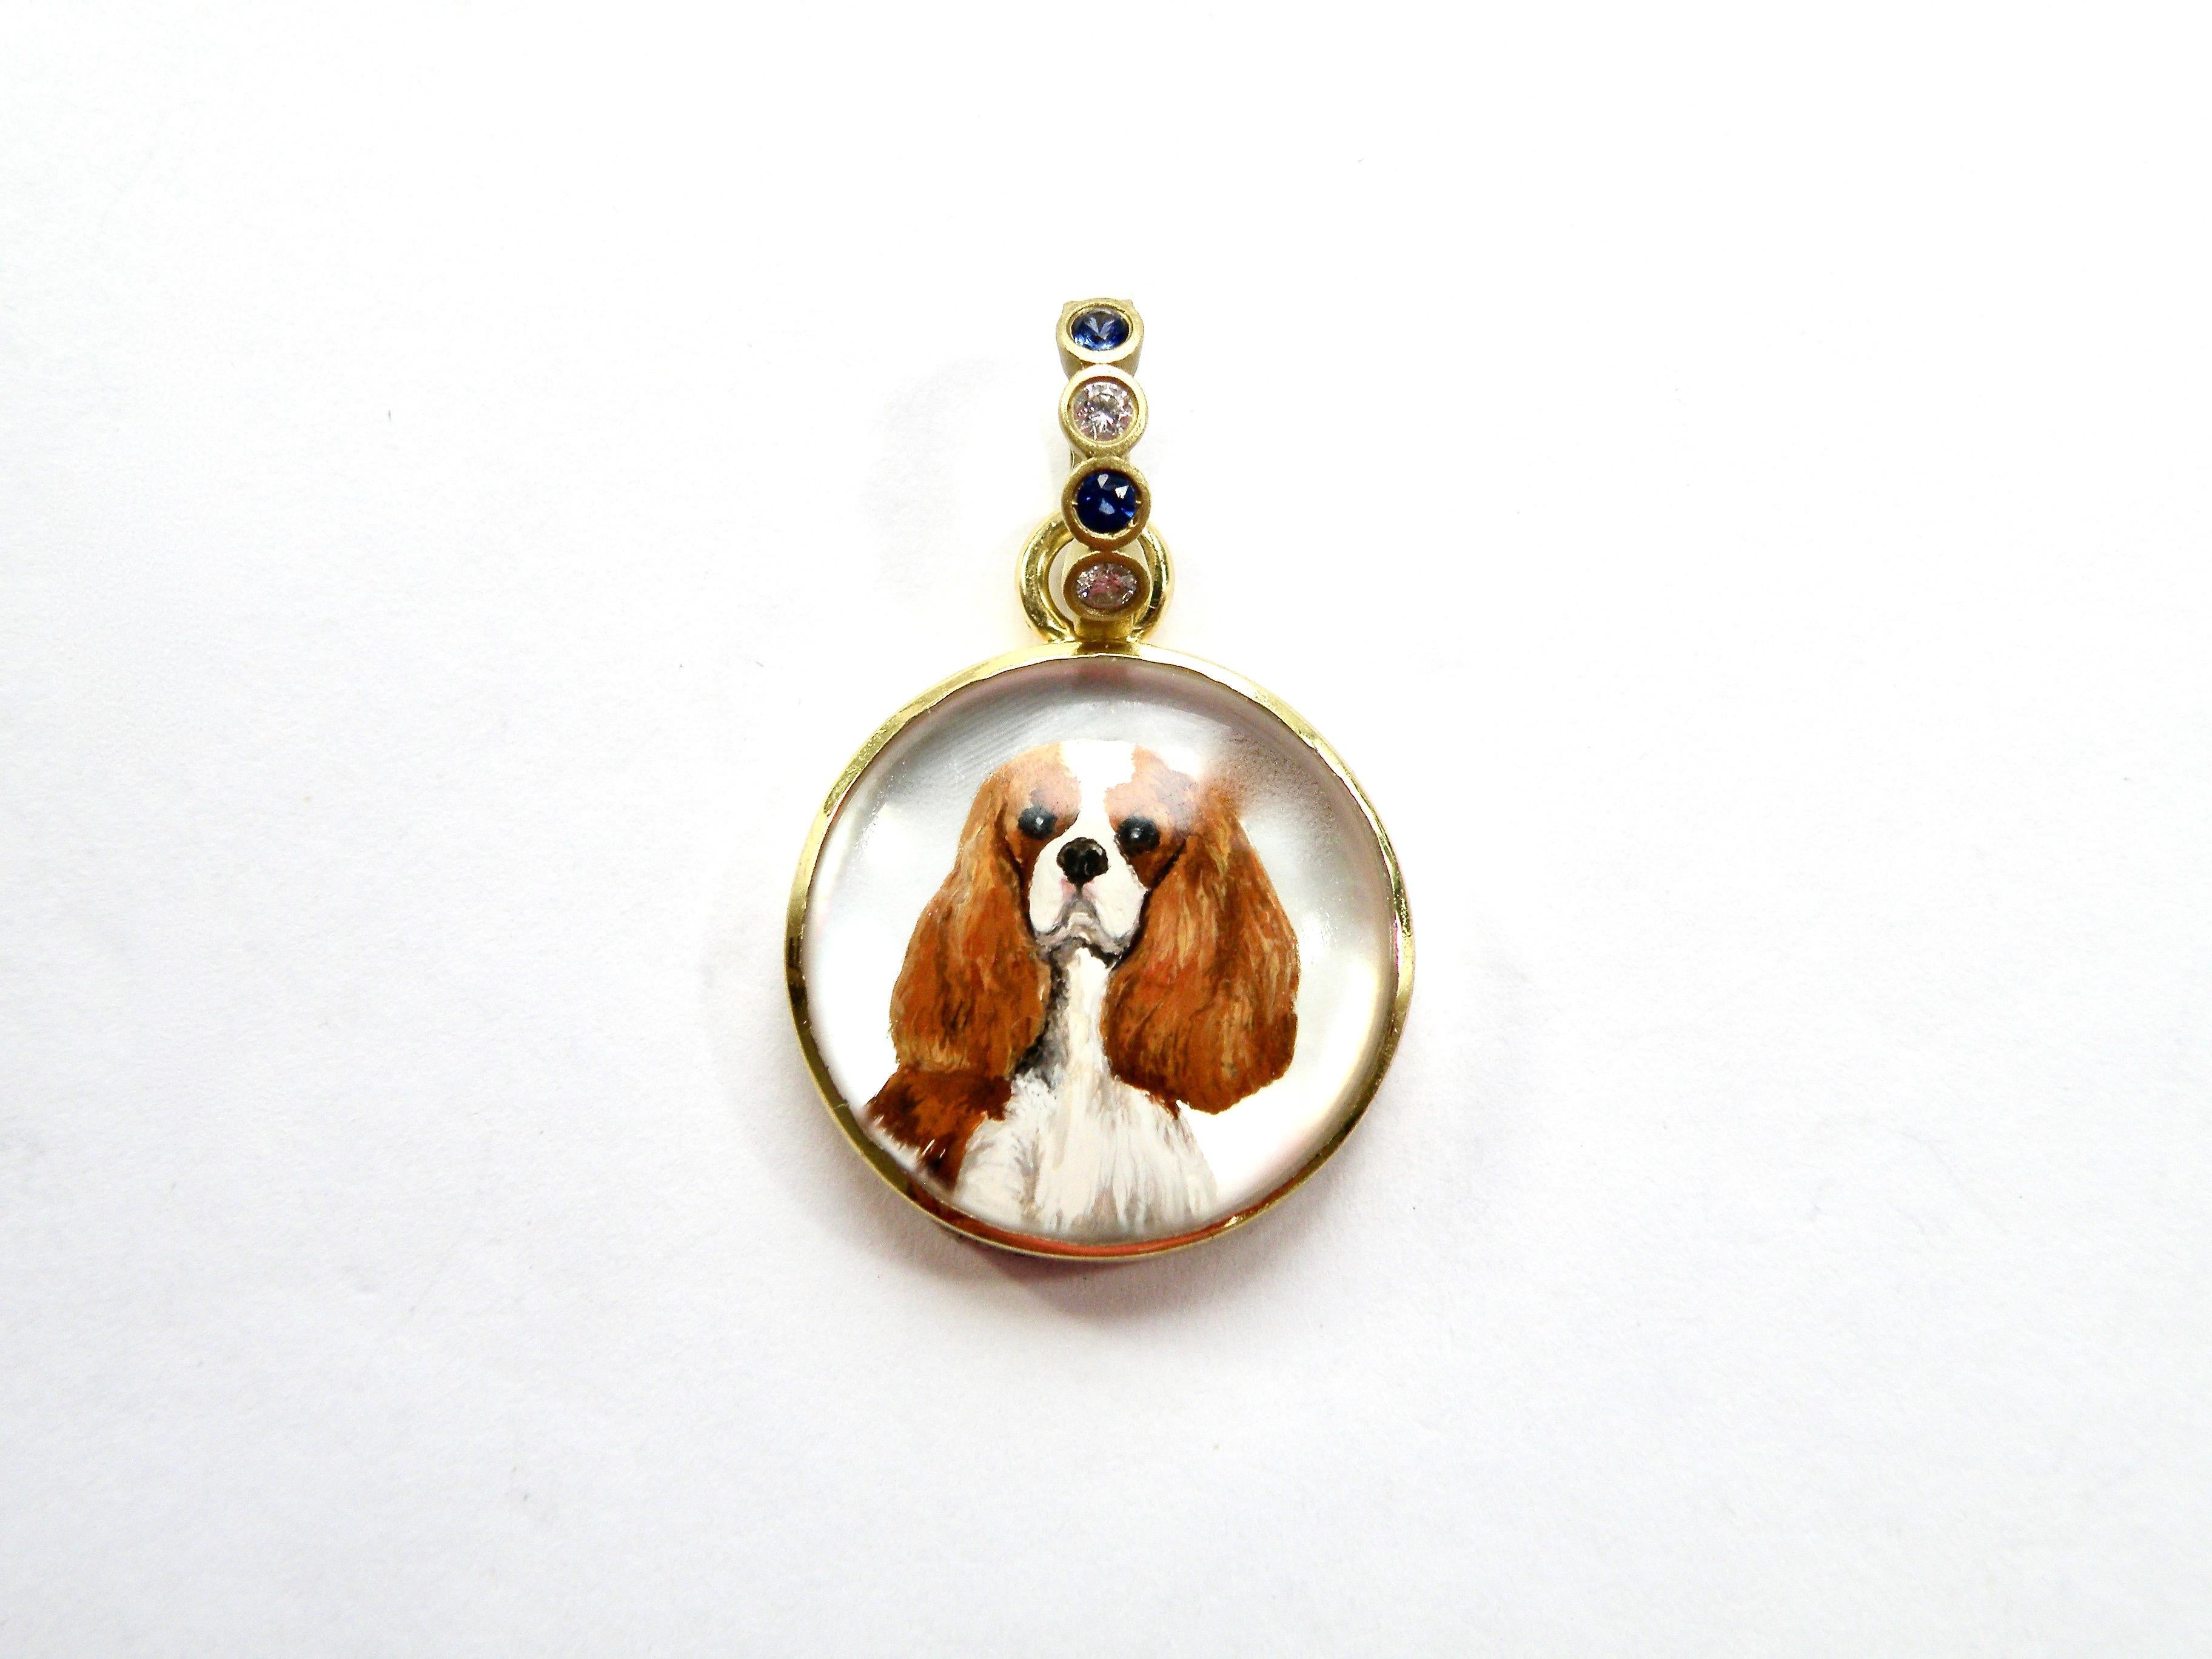 18K king charles calvalier pendant hand painted on crystal with mother of pearl backing and sapphire bail